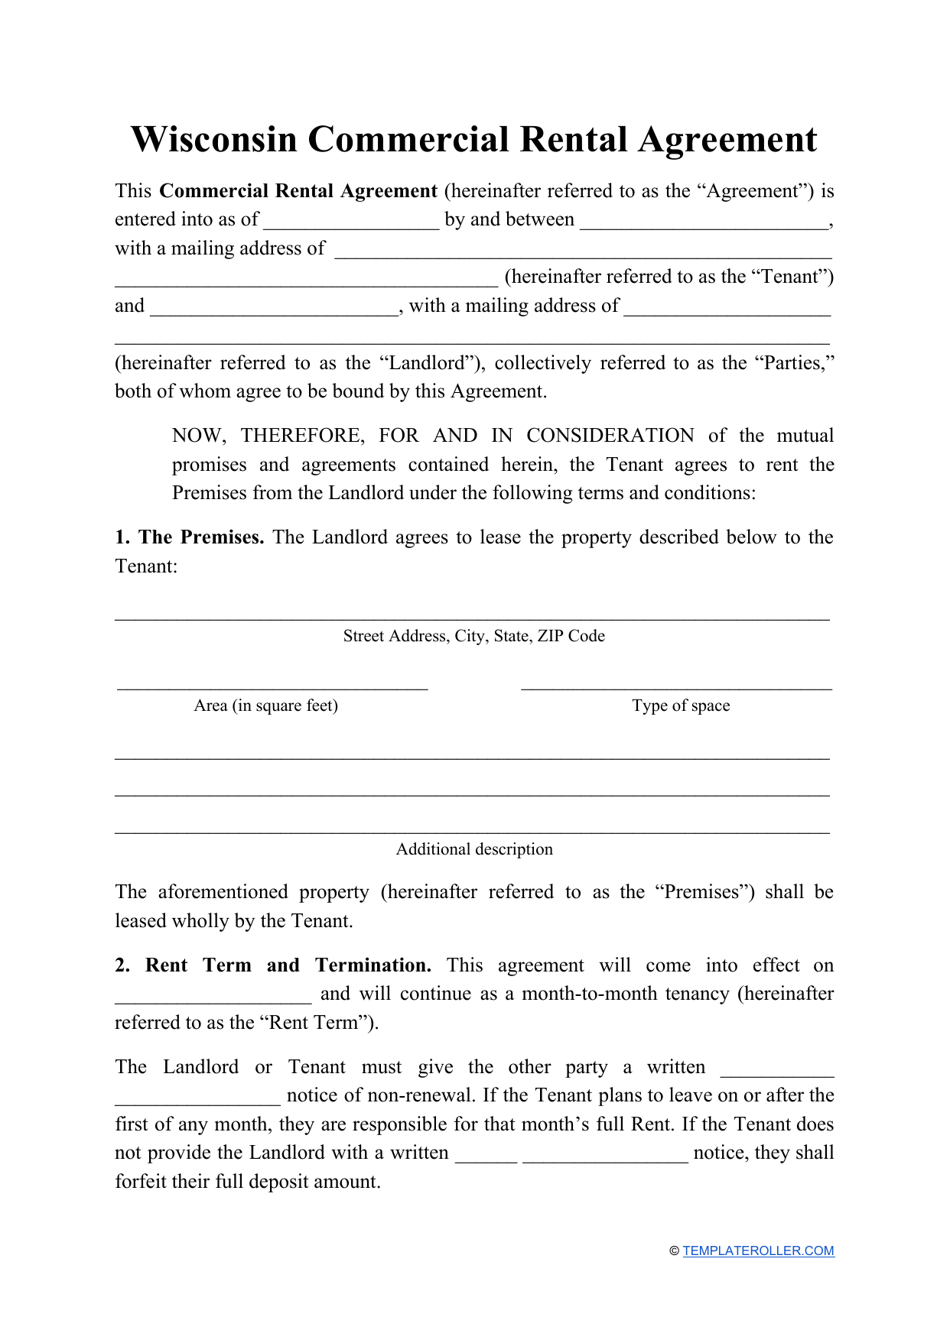 Commercial Rental Agreement Template - Wisconsin, Page 1